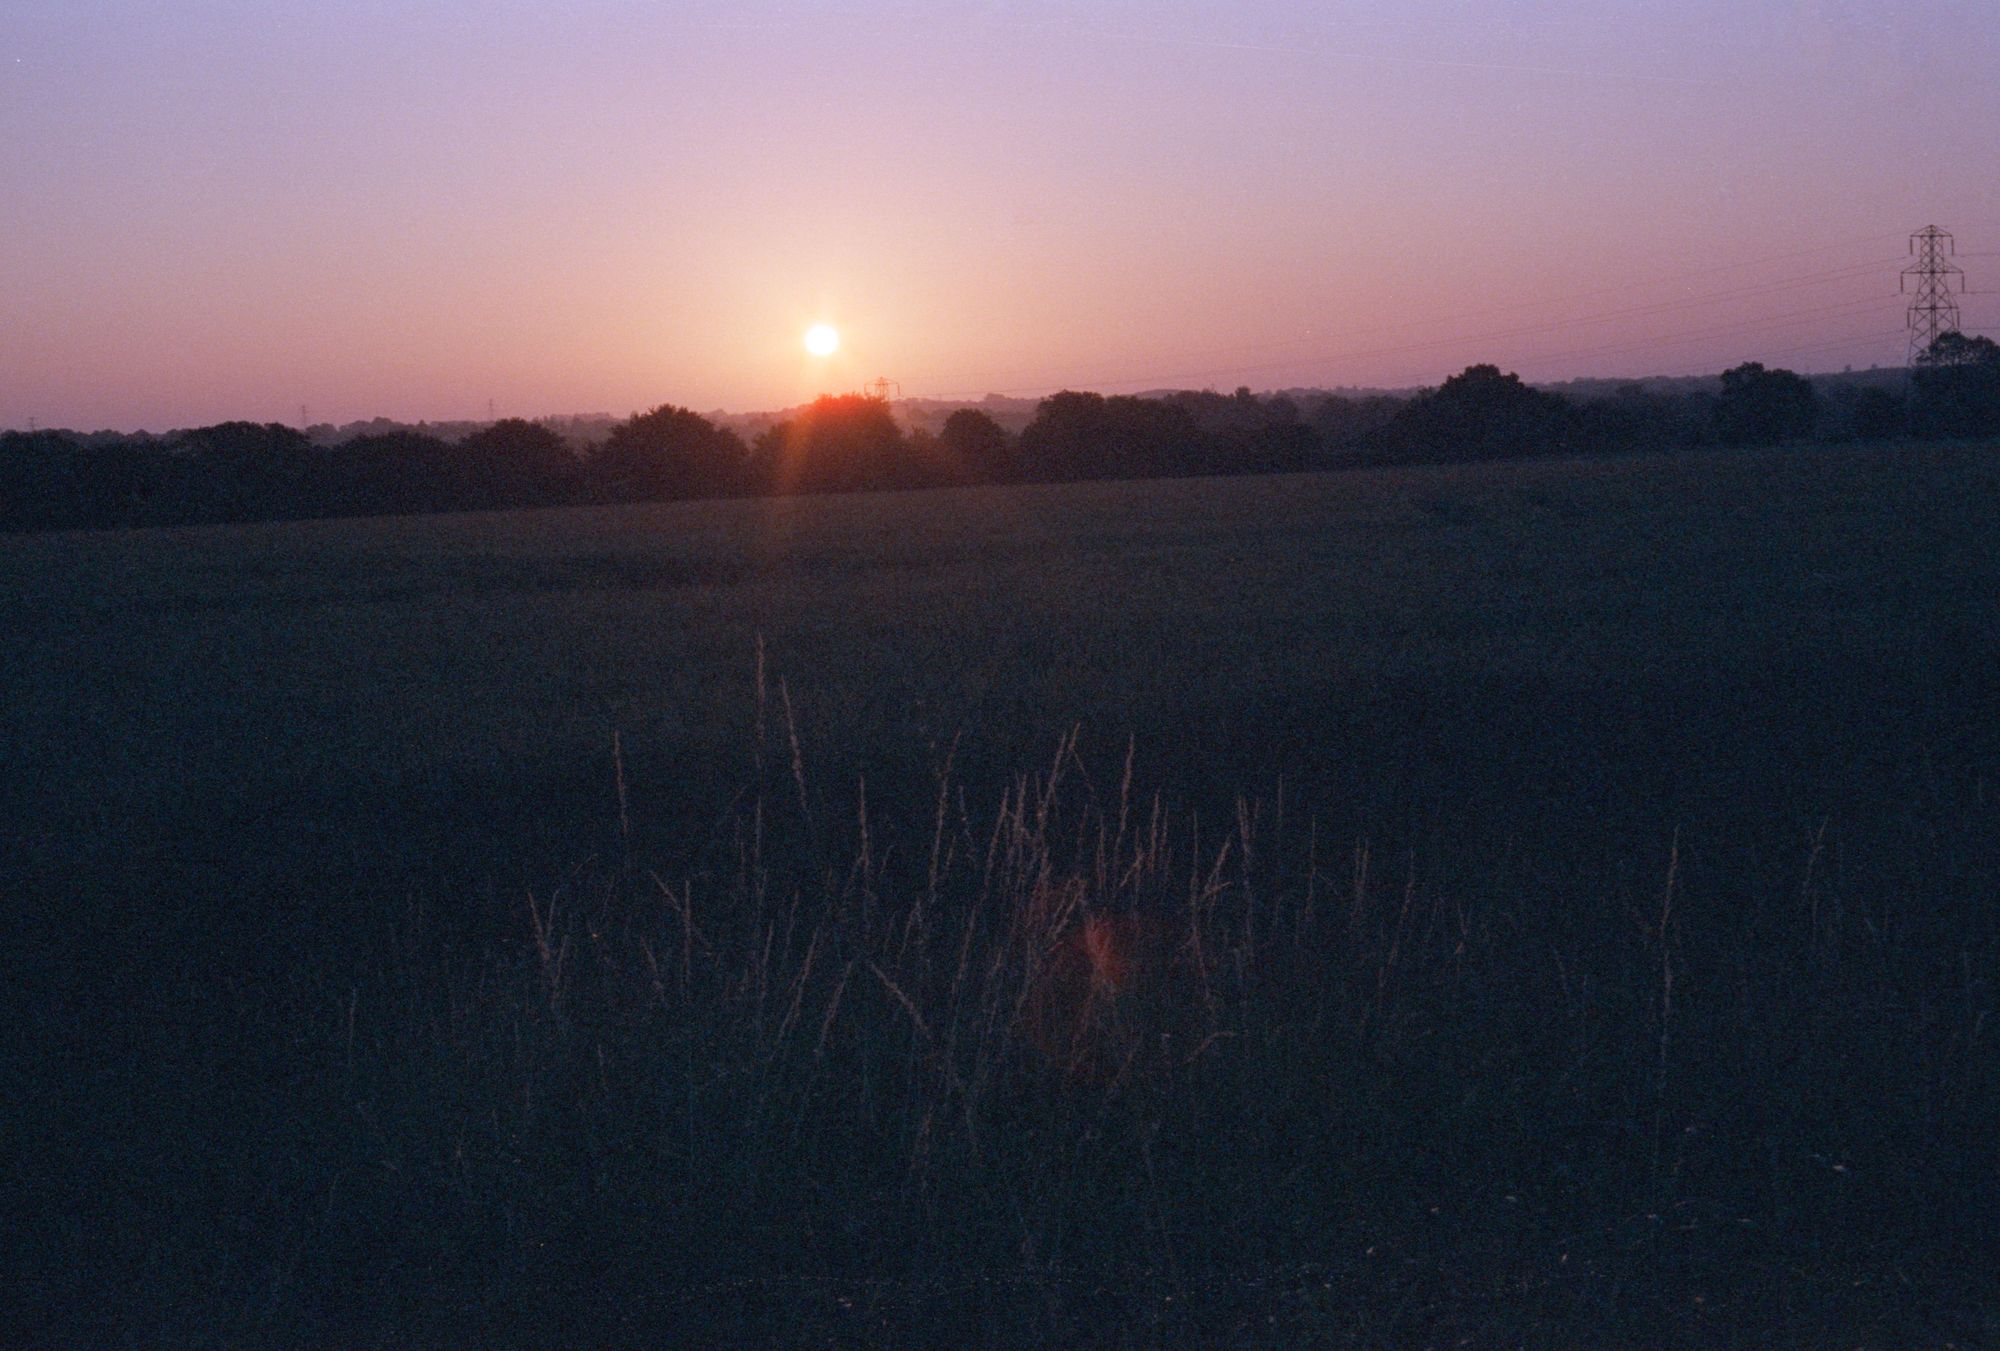 A pink-and-purple sunrise over flat fields with electricity pylons in the distance.